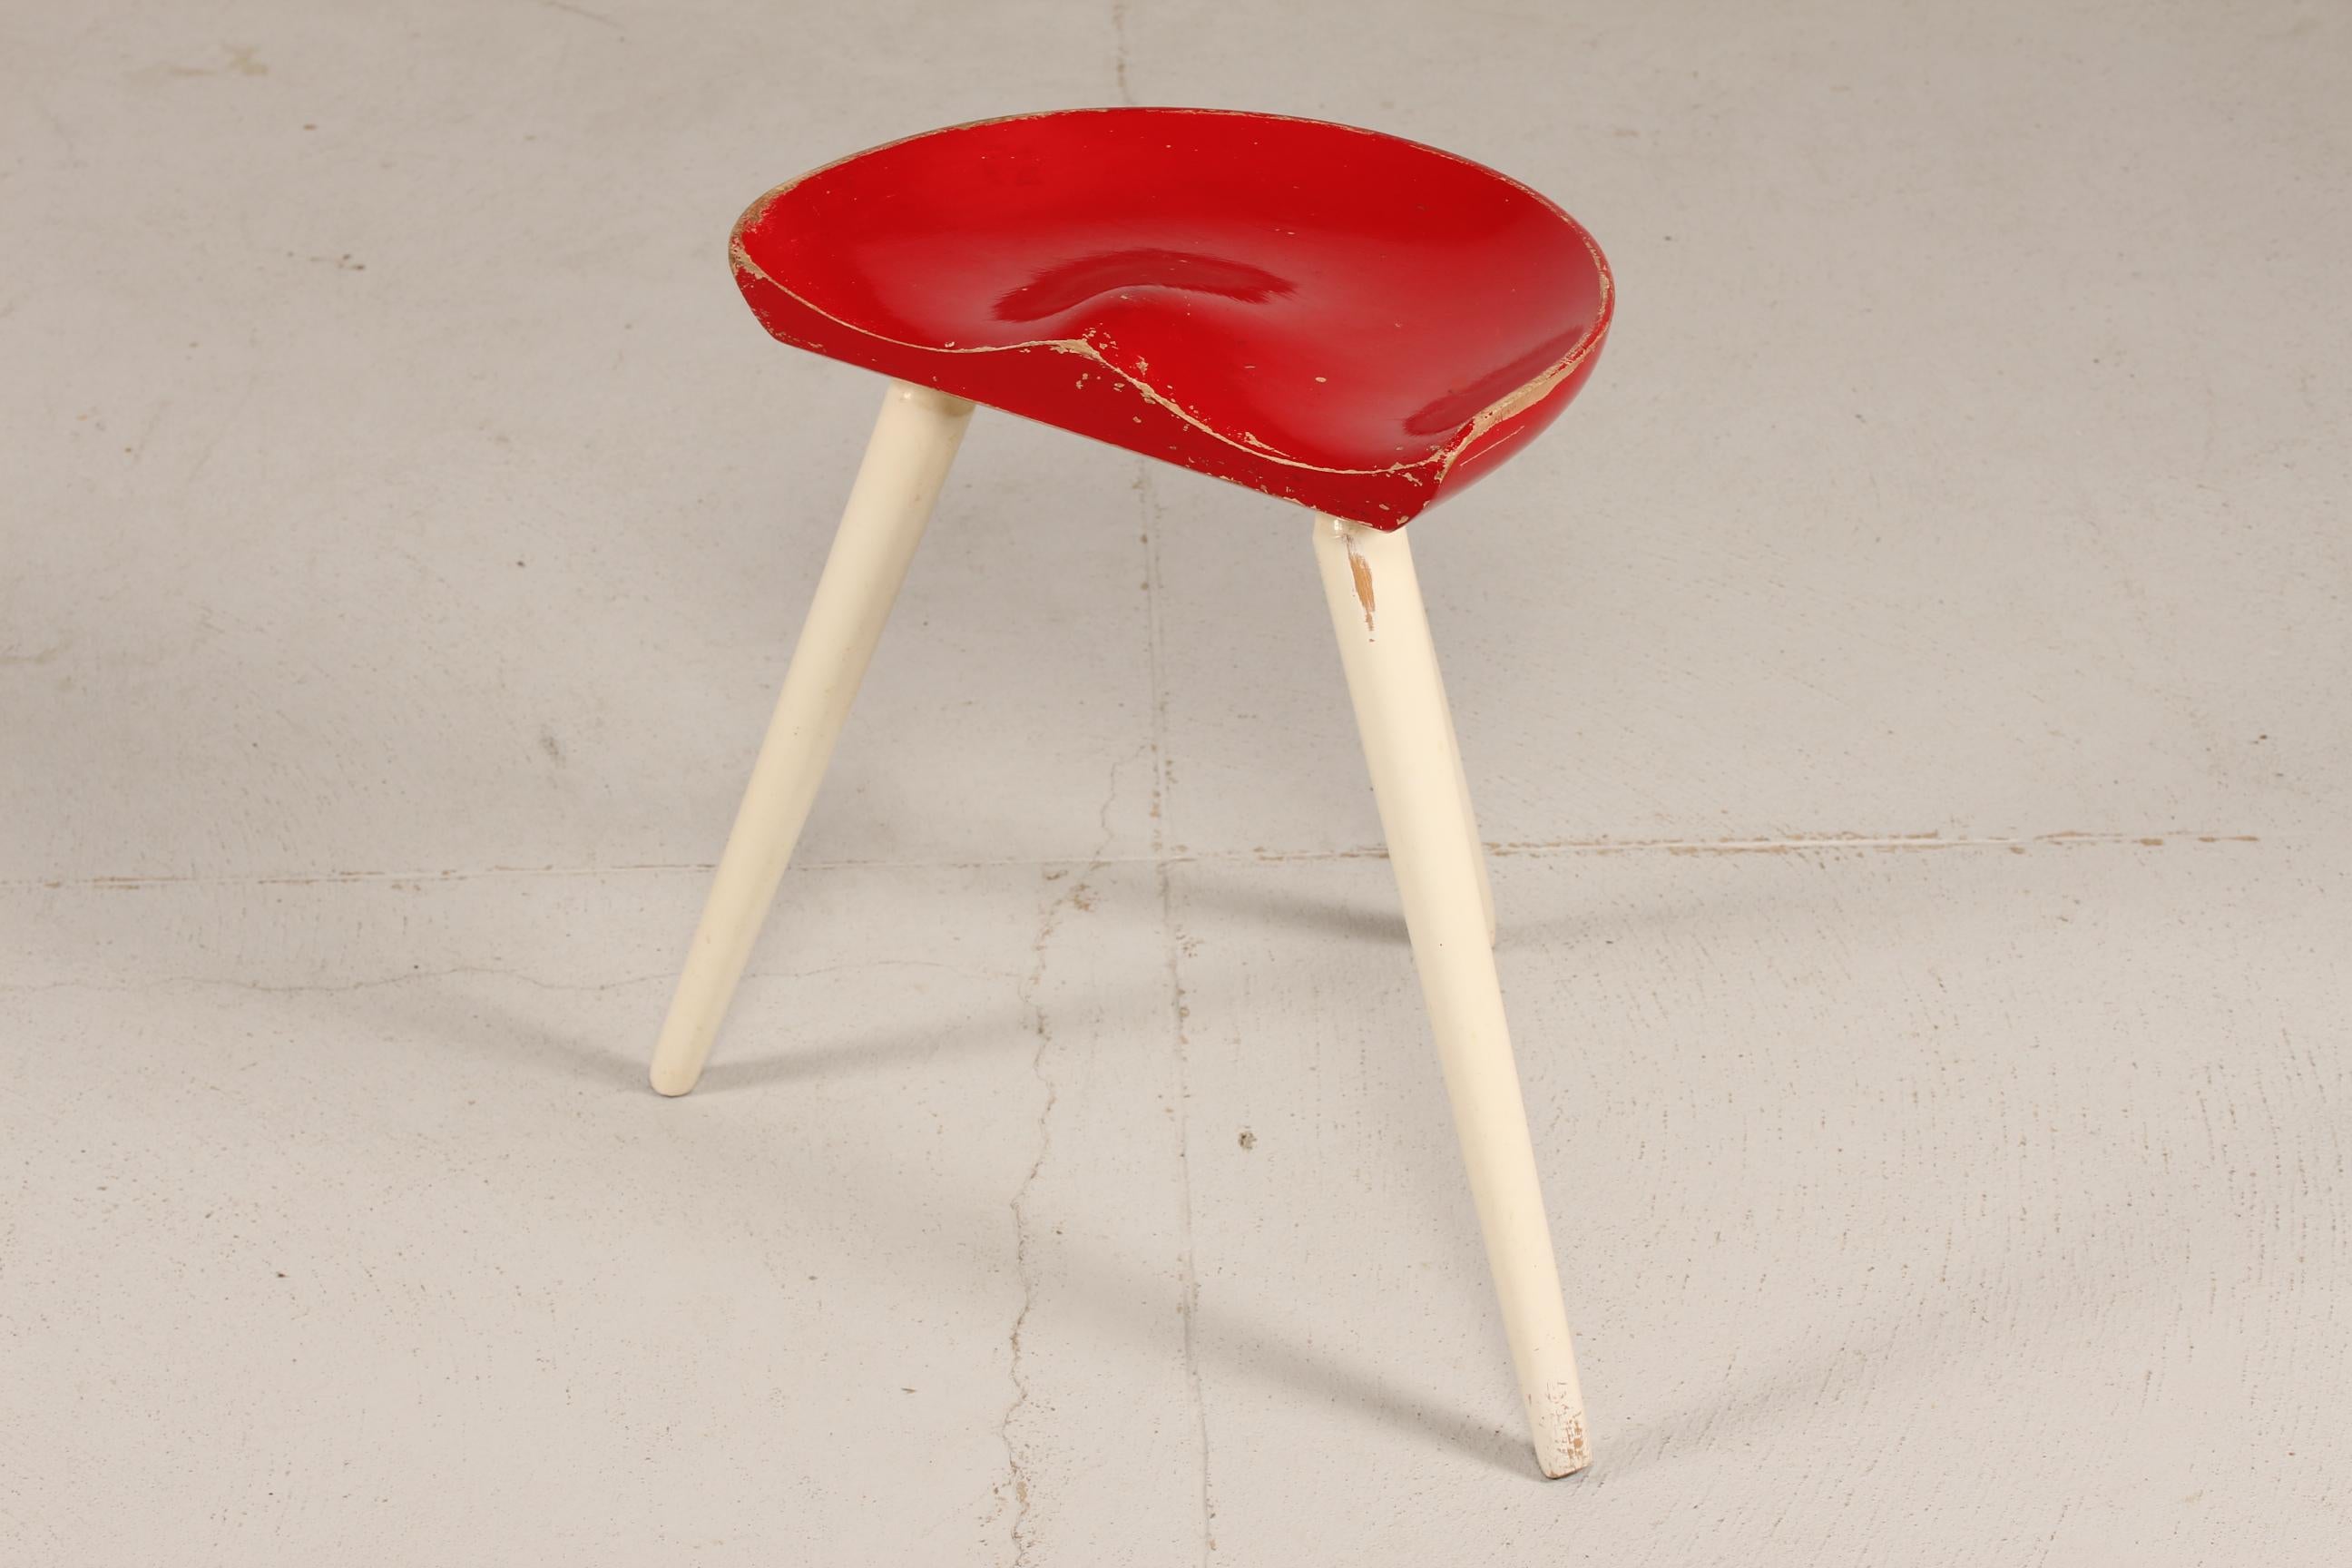 Danish modern milking stool in the style of Mogens Lassen.
It´s made of solid pine wood and comes with the original red and white paint.
The seat is sculpted so it suits your back and it´s very comfortable to sit on.
Made circa